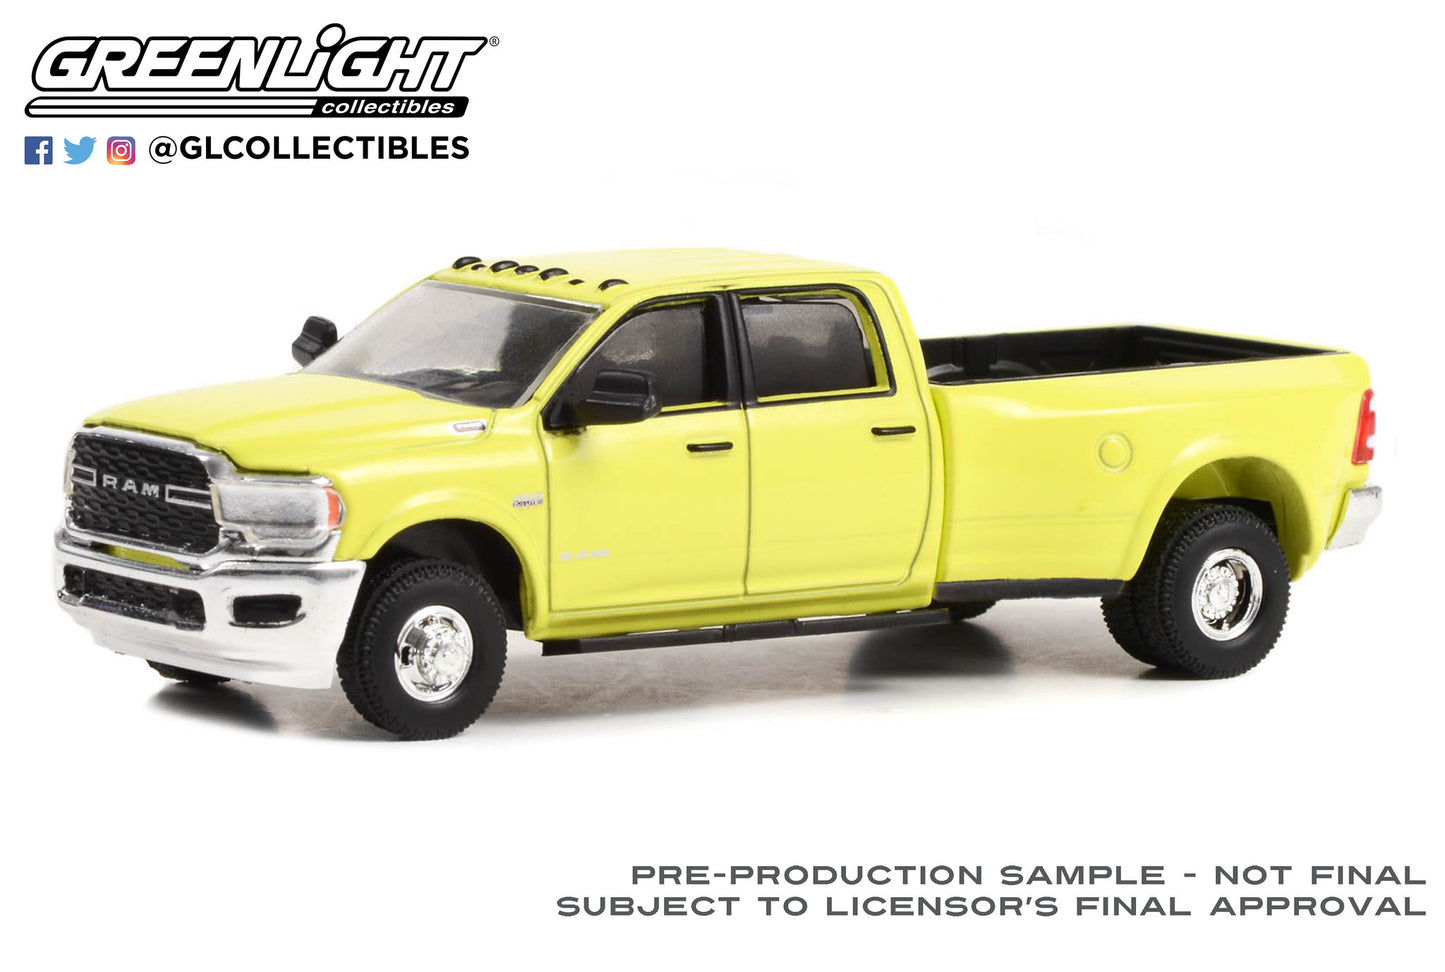 GreenLight 1:64 Dually Drivers Series 11 - 2019 Dodge Ram 3500 Big Horn - National Safety Yellow 46110-E